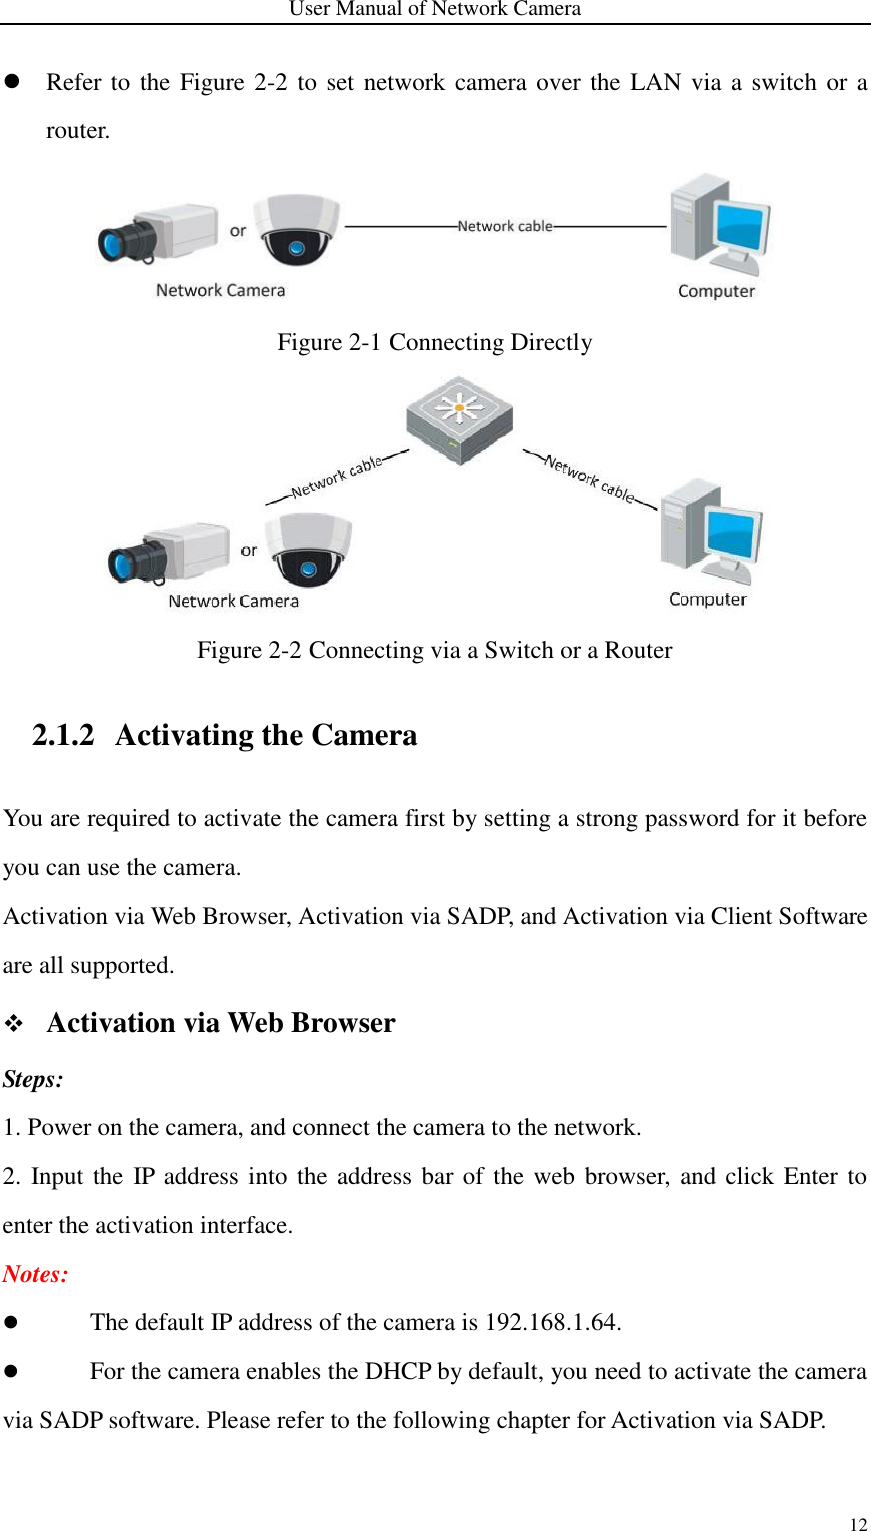 User Manual of Network Camera 12   Refer to the Figure 2-2 to set network camera over the LAN via a switch or a router.  Figure 2-1 Connecting Directly  Figure 2-2 Connecting via a Switch or a Router 2.1.2 Activating the Camera You are required to activate the camera first by setting a strong password for it before you can use the camera. Activation via Web Browser, Activation via SADP, and Activation via Client Software are all supported.    Activation via Web Browser Steps: 1. Power on the camera, and connect the camera to the network. 2. Input the IP address into the address bar of the web browser,  and click Enter to enter the activation interface. Notes:    The default IP address of the camera is 192.168.1.64.      For the camera enables the DHCP by default, you need to activate the camera via SADP software. Please refer to the following chapter for Activation via SADP. 